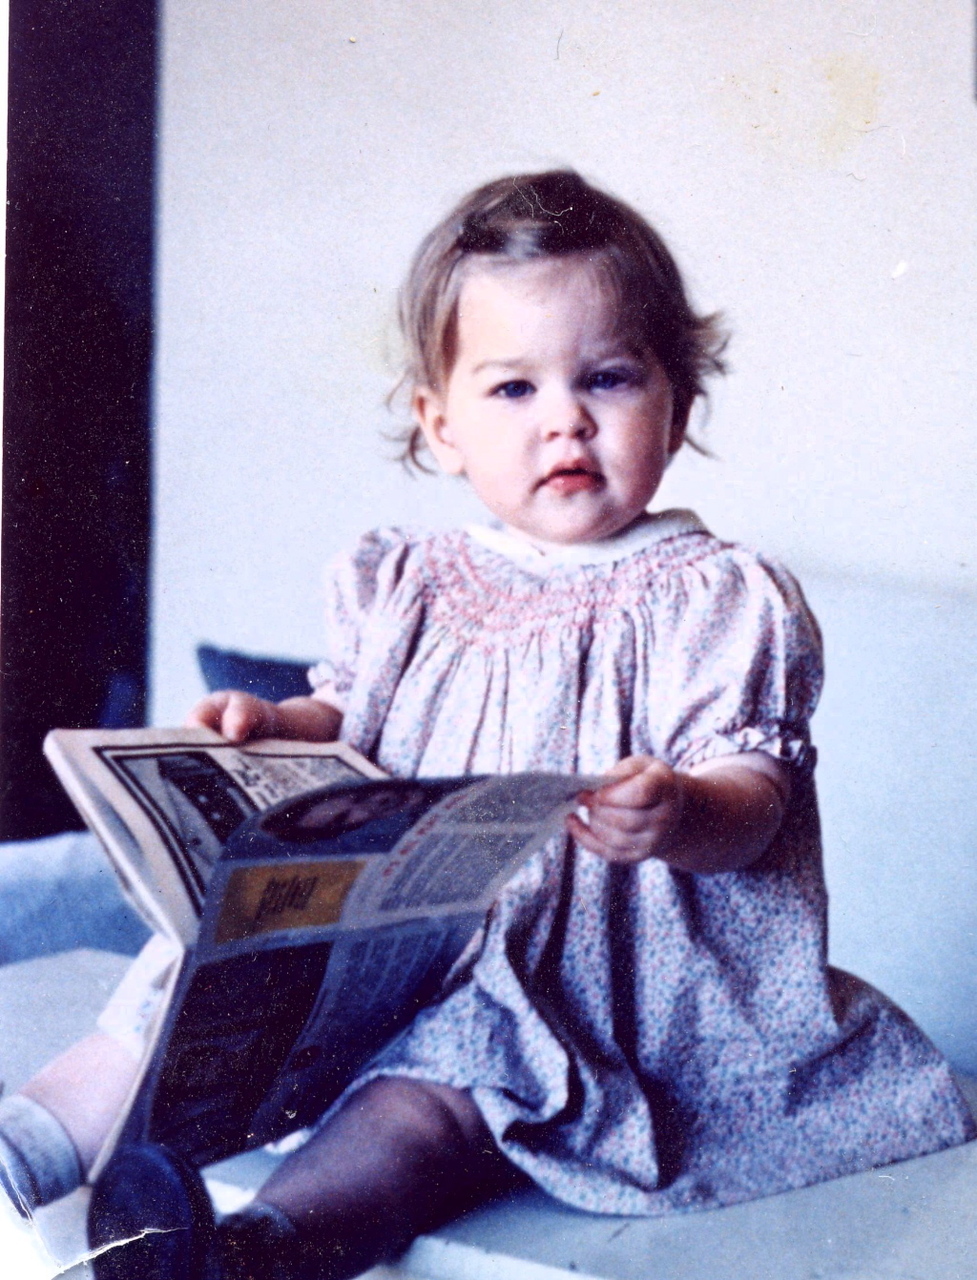 At 15 months old, getting a head start on my book career.